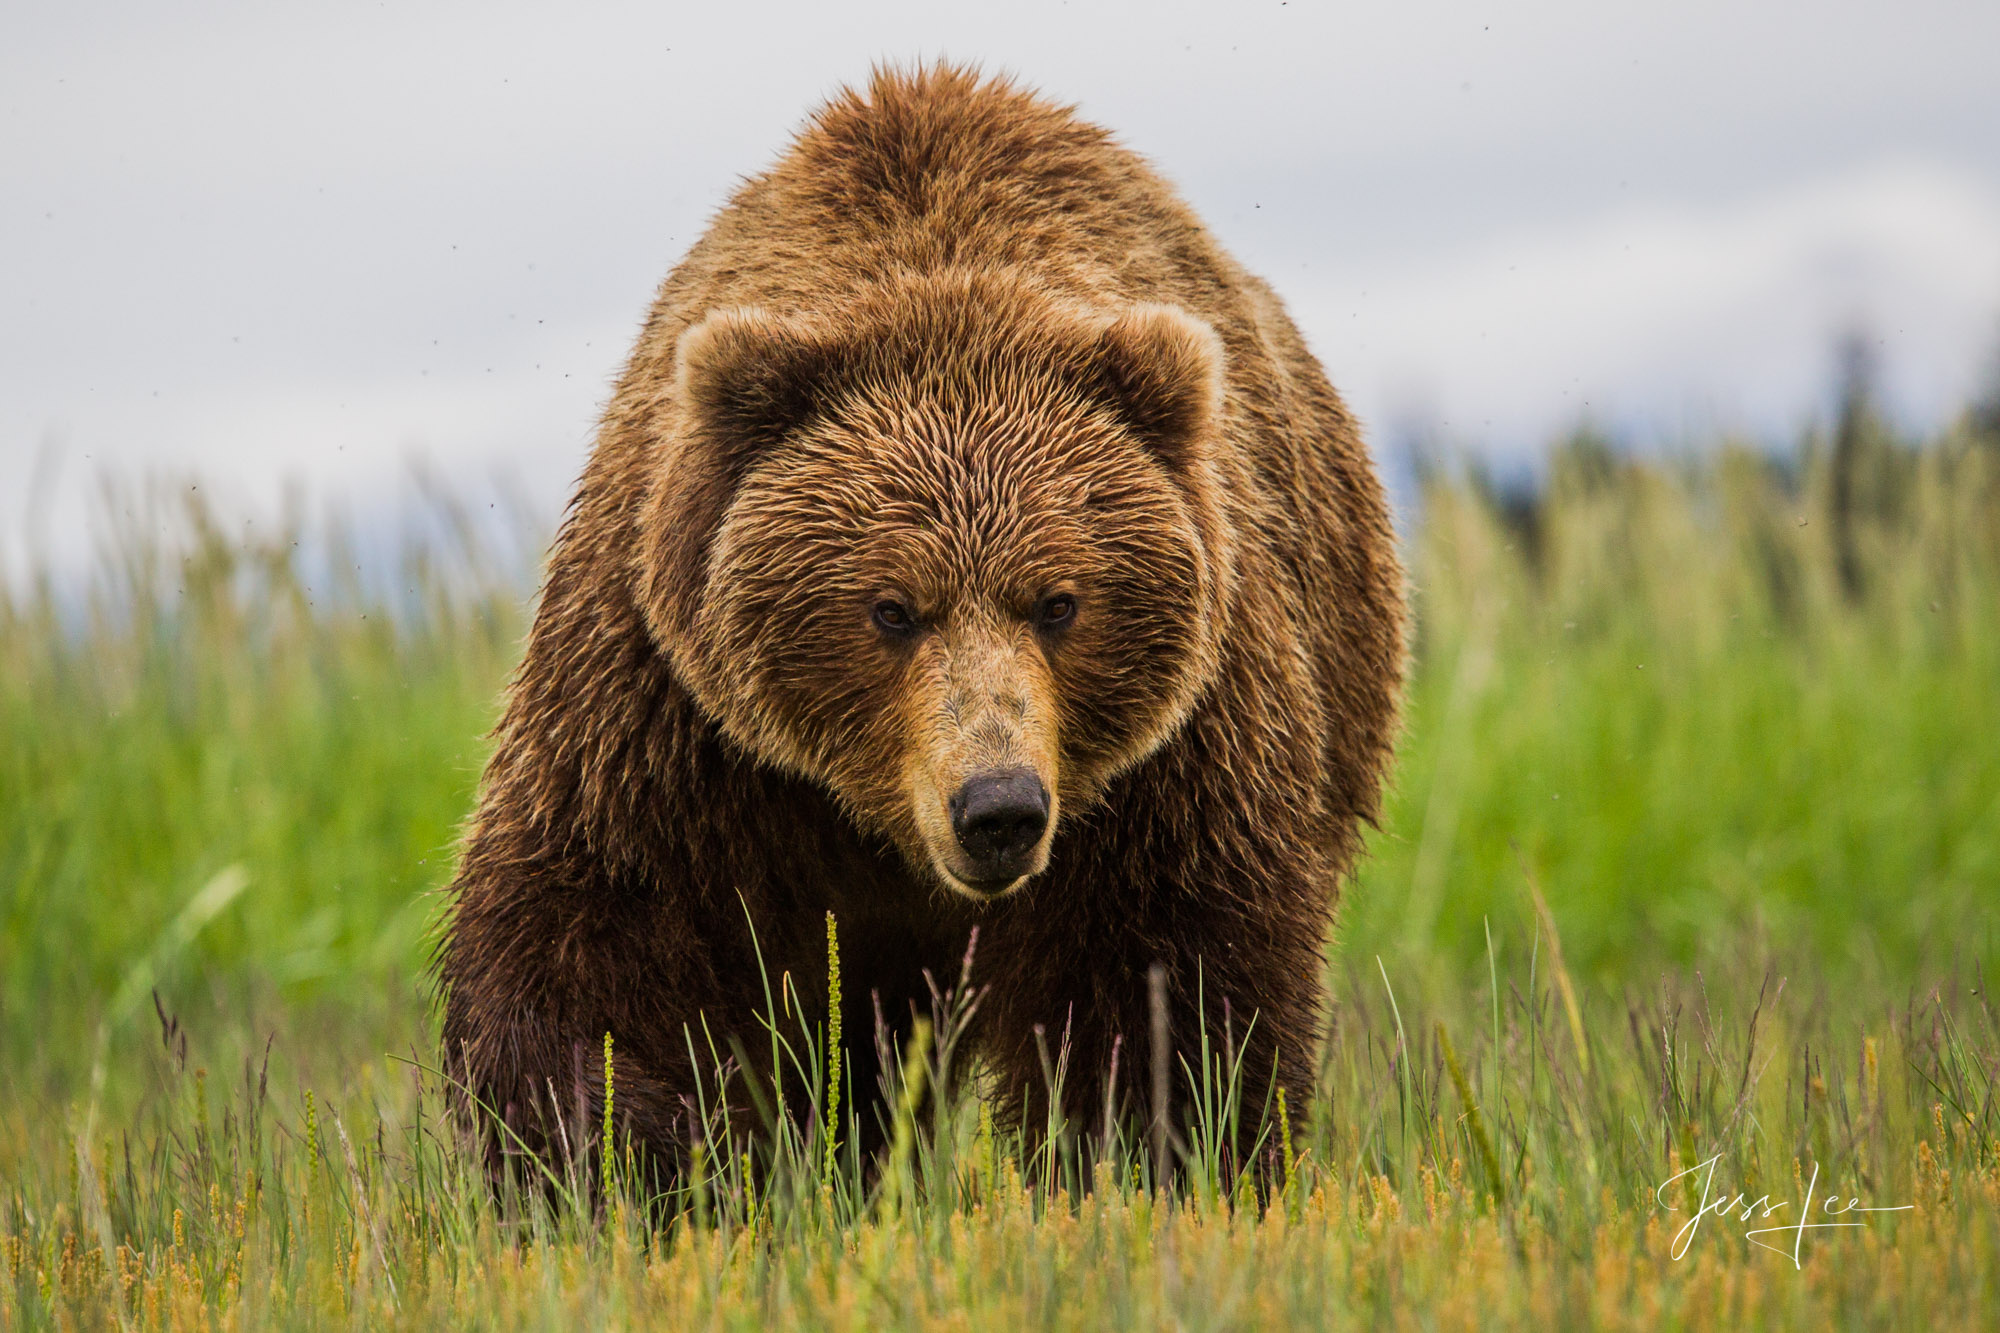 Alaska Brown Bear Photography These Grizzly bear fine art wildlife photographs are offered as high-quality prints for sale as...